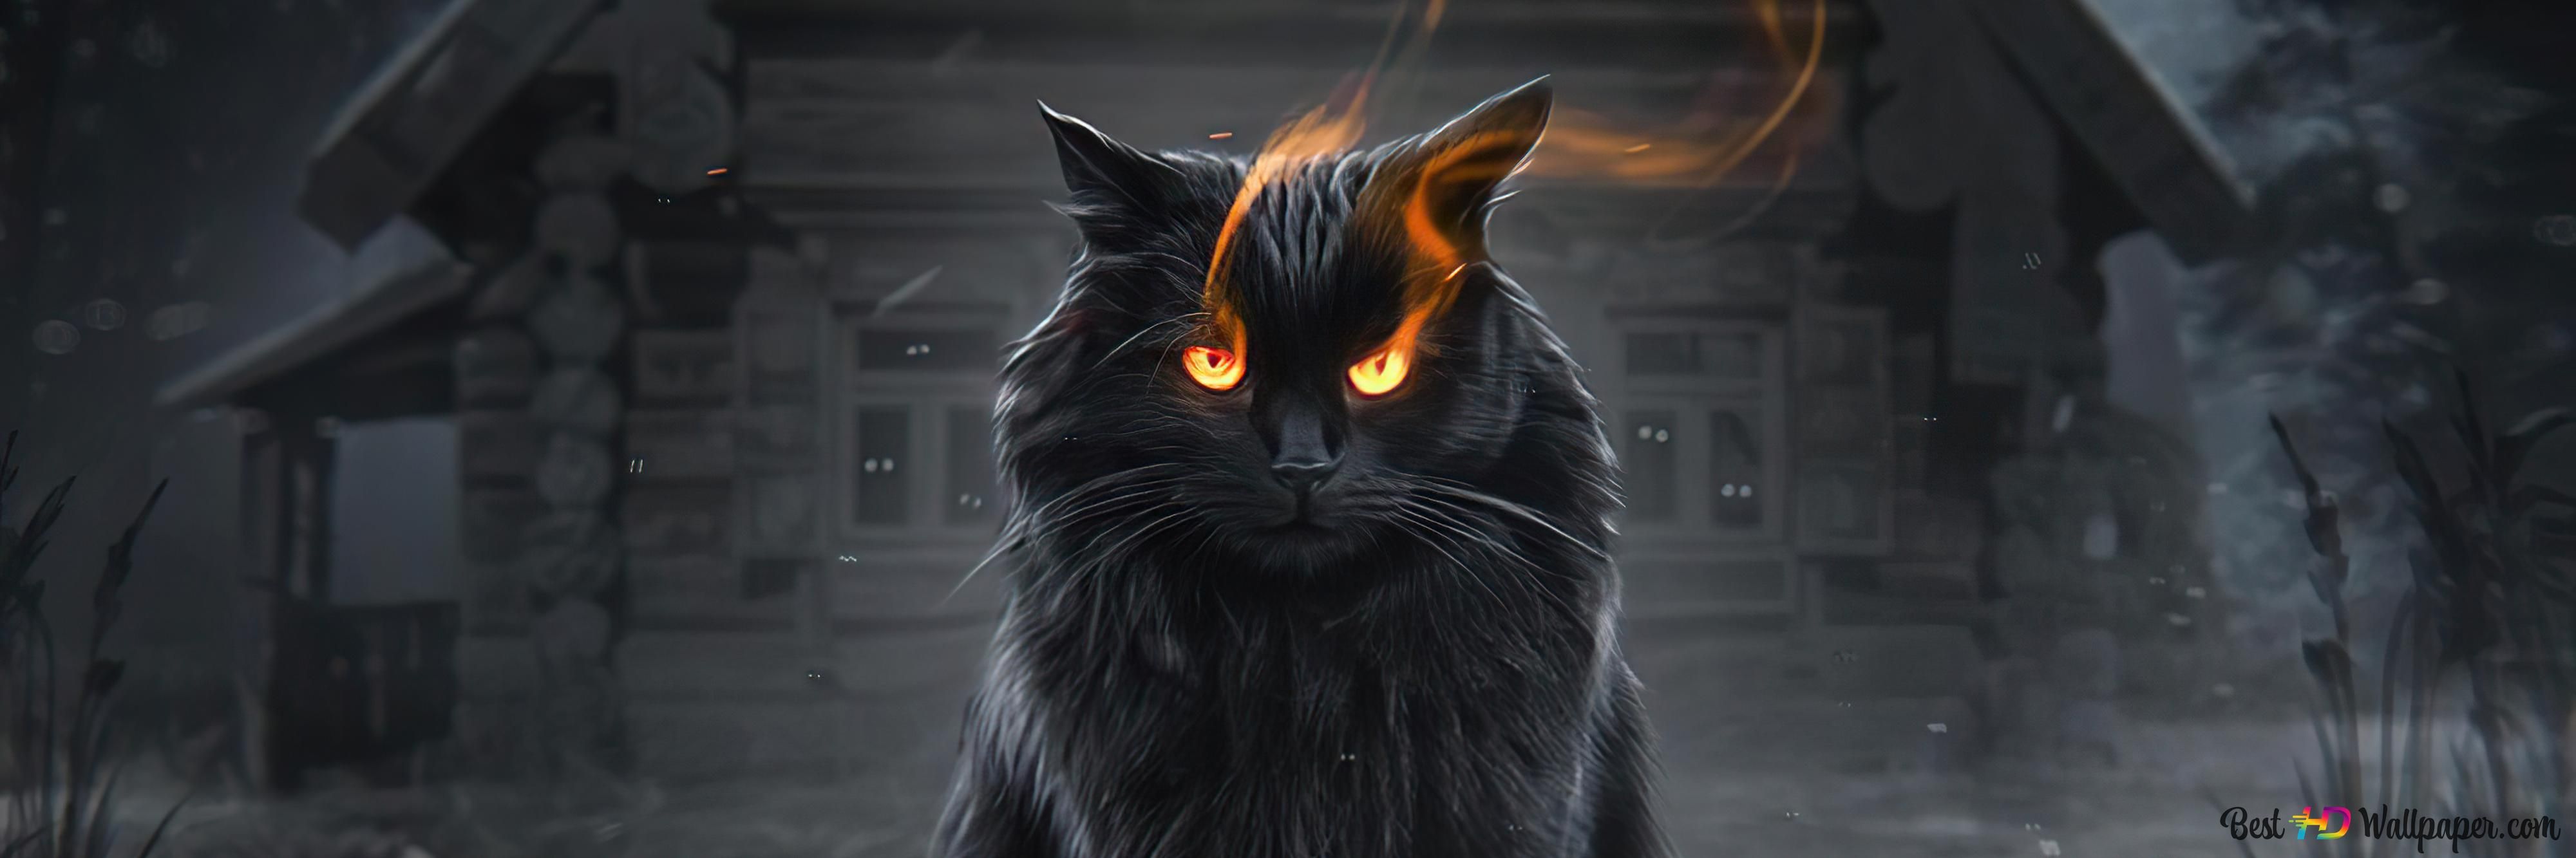 Black cat with fire in the eyes - Cat